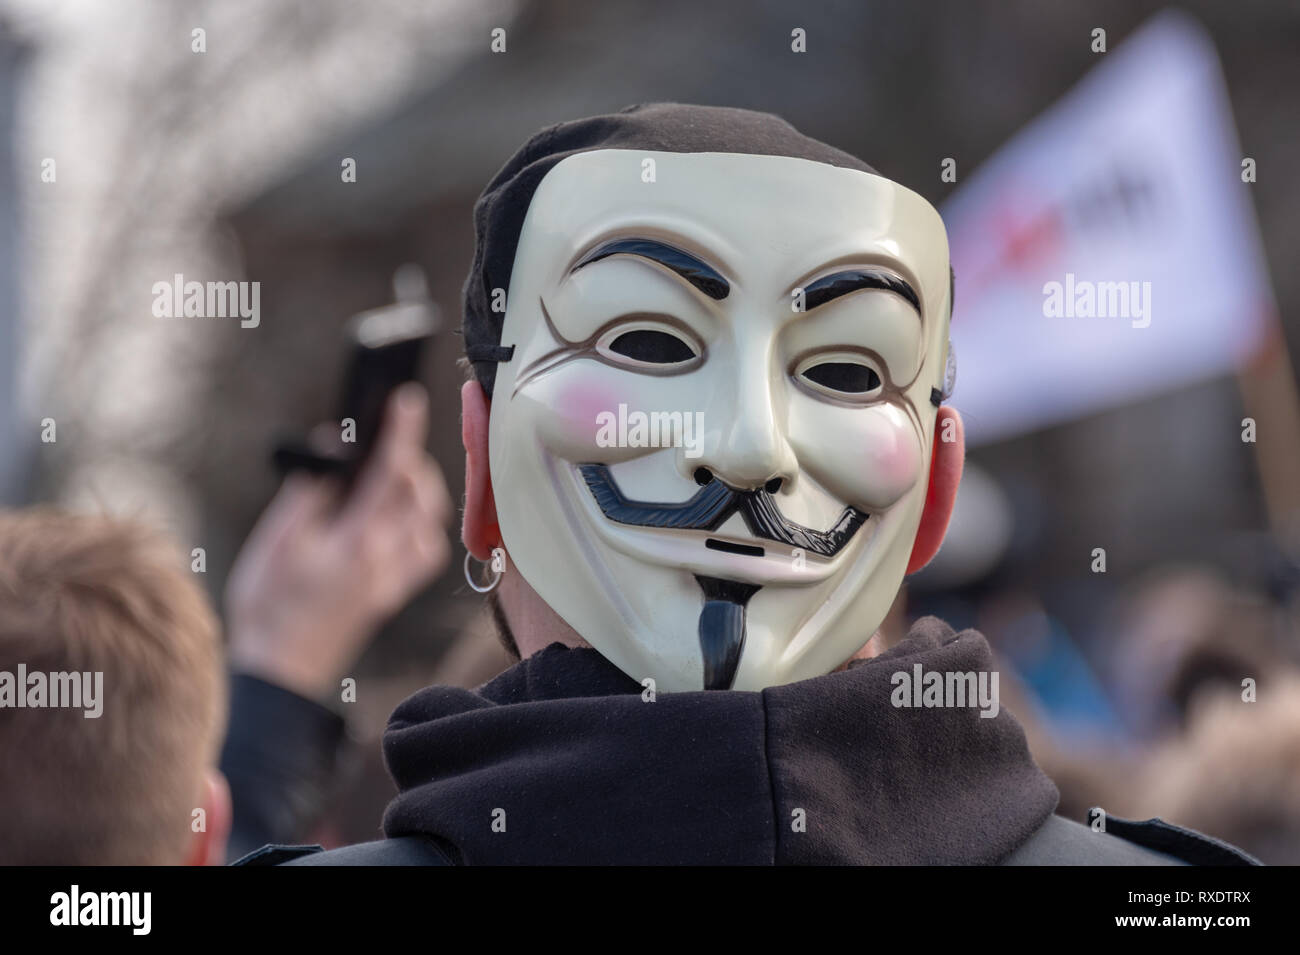 Magdeburg, Germany - 09th March, 2019: : A demonstrator wears an anonymous mask. The man took part in a demonstration in Magdeburg by 1000 mostly young people against EU copyright reform. The demonstrators fear censorship of the Internet if Article 13 is implemented. Credit: Mattis Kaminer/Alamy Live News Stock Photo